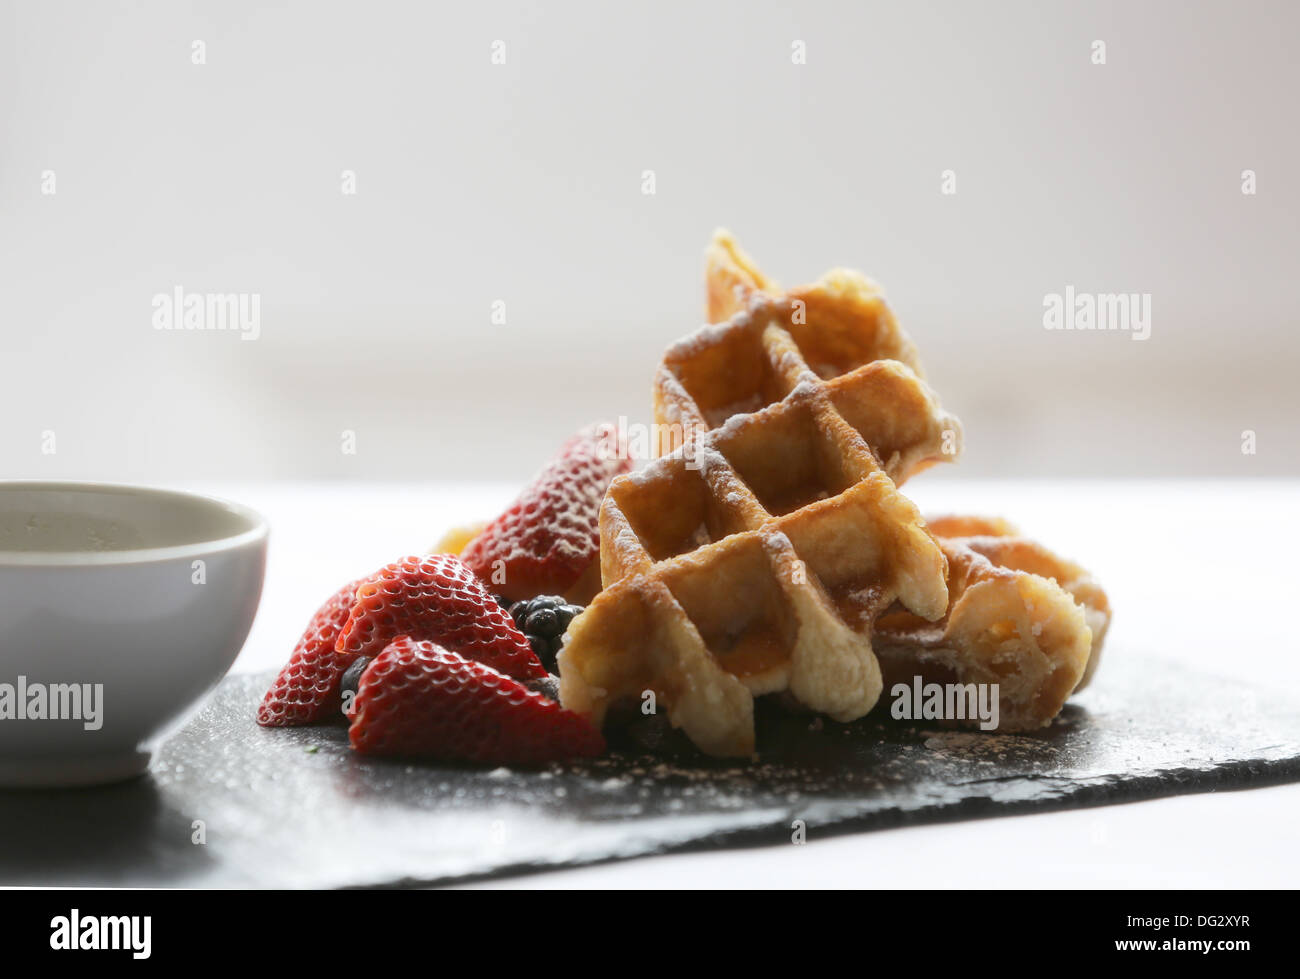 Belgian waffles with strawberries and maple syrup Stock Photo